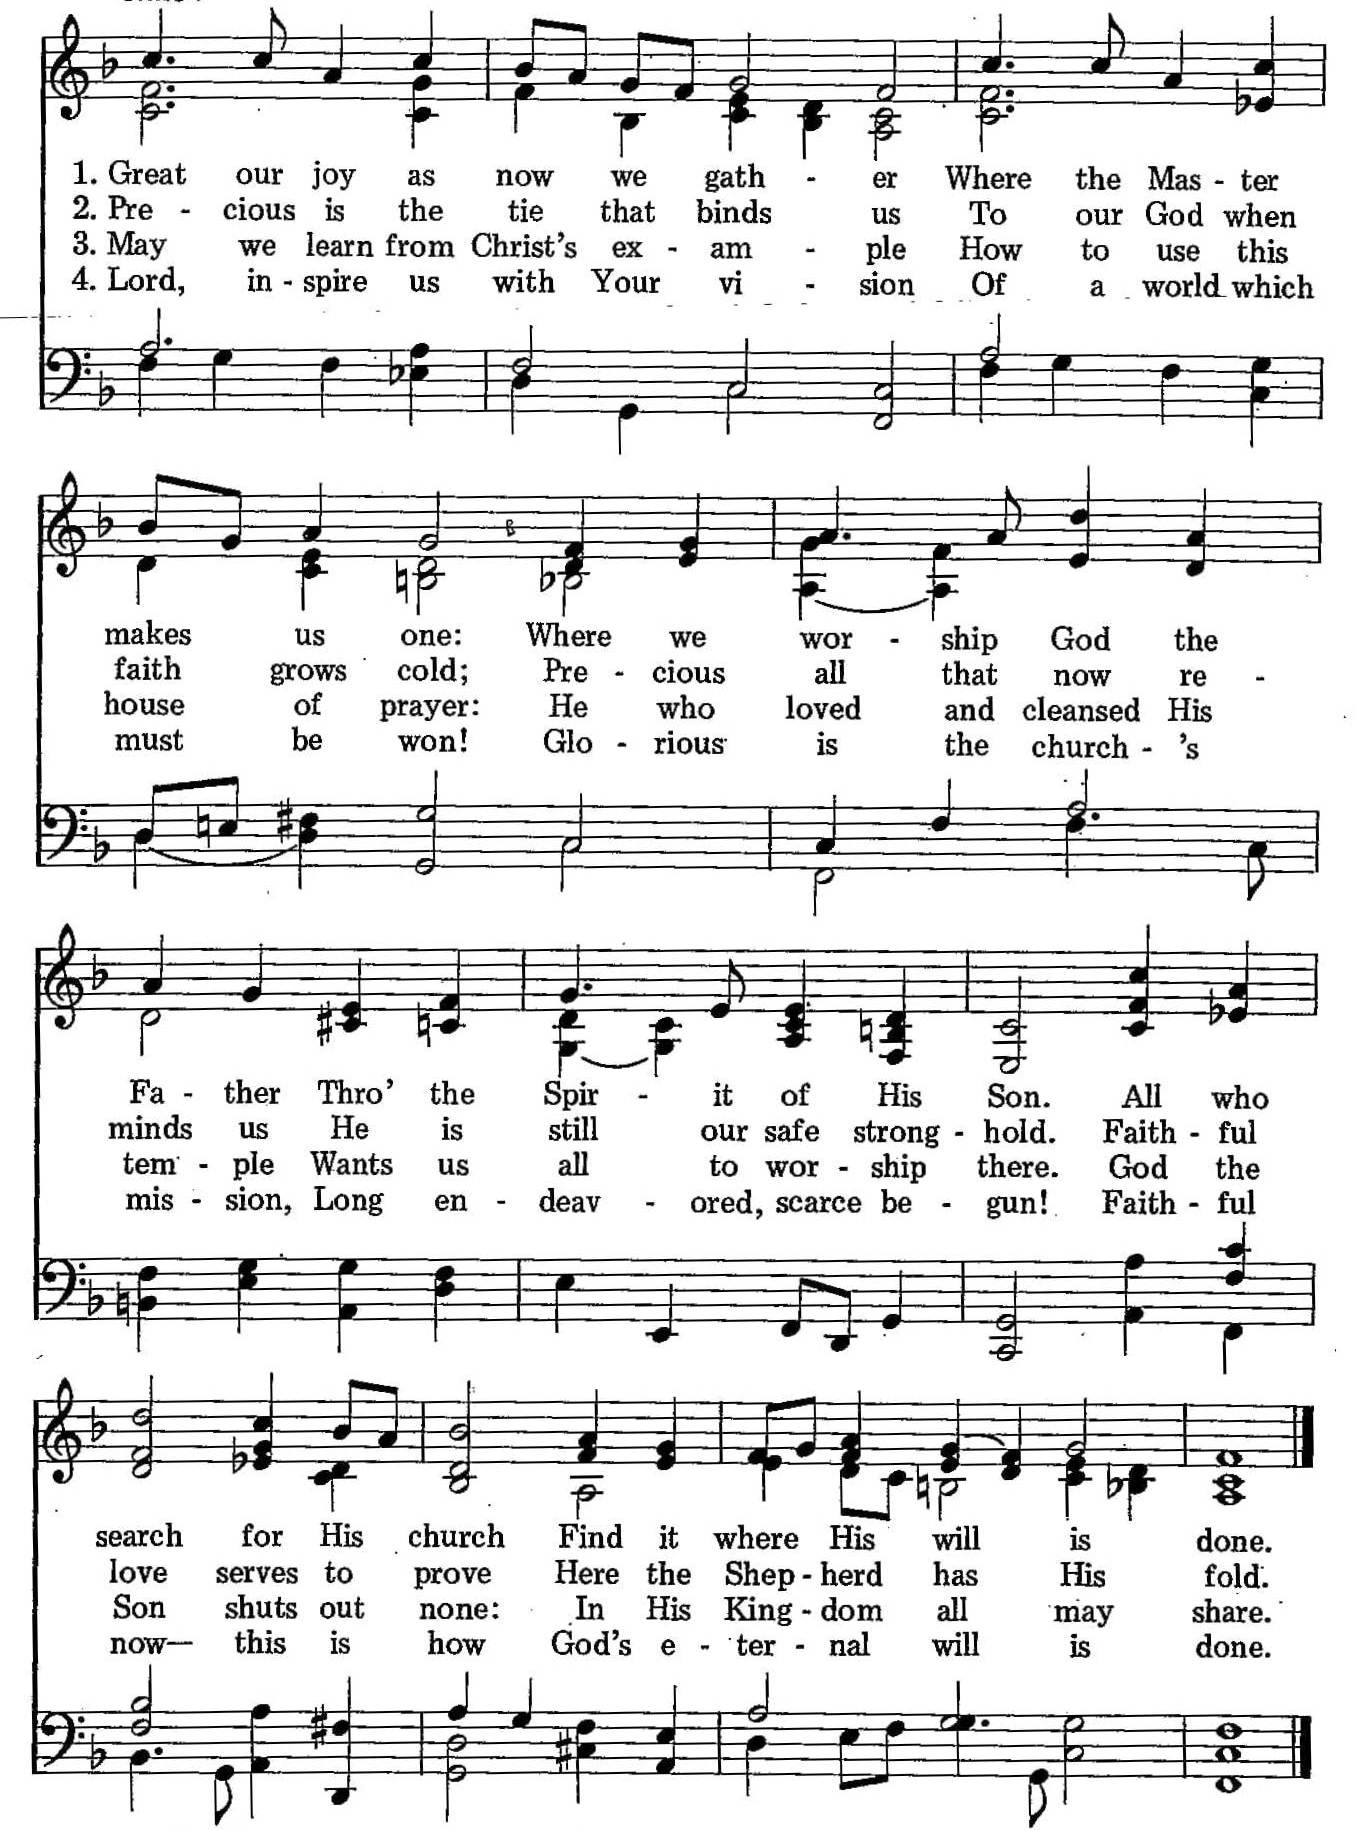 059 – Great Our Joy as Now We Gather sheet music